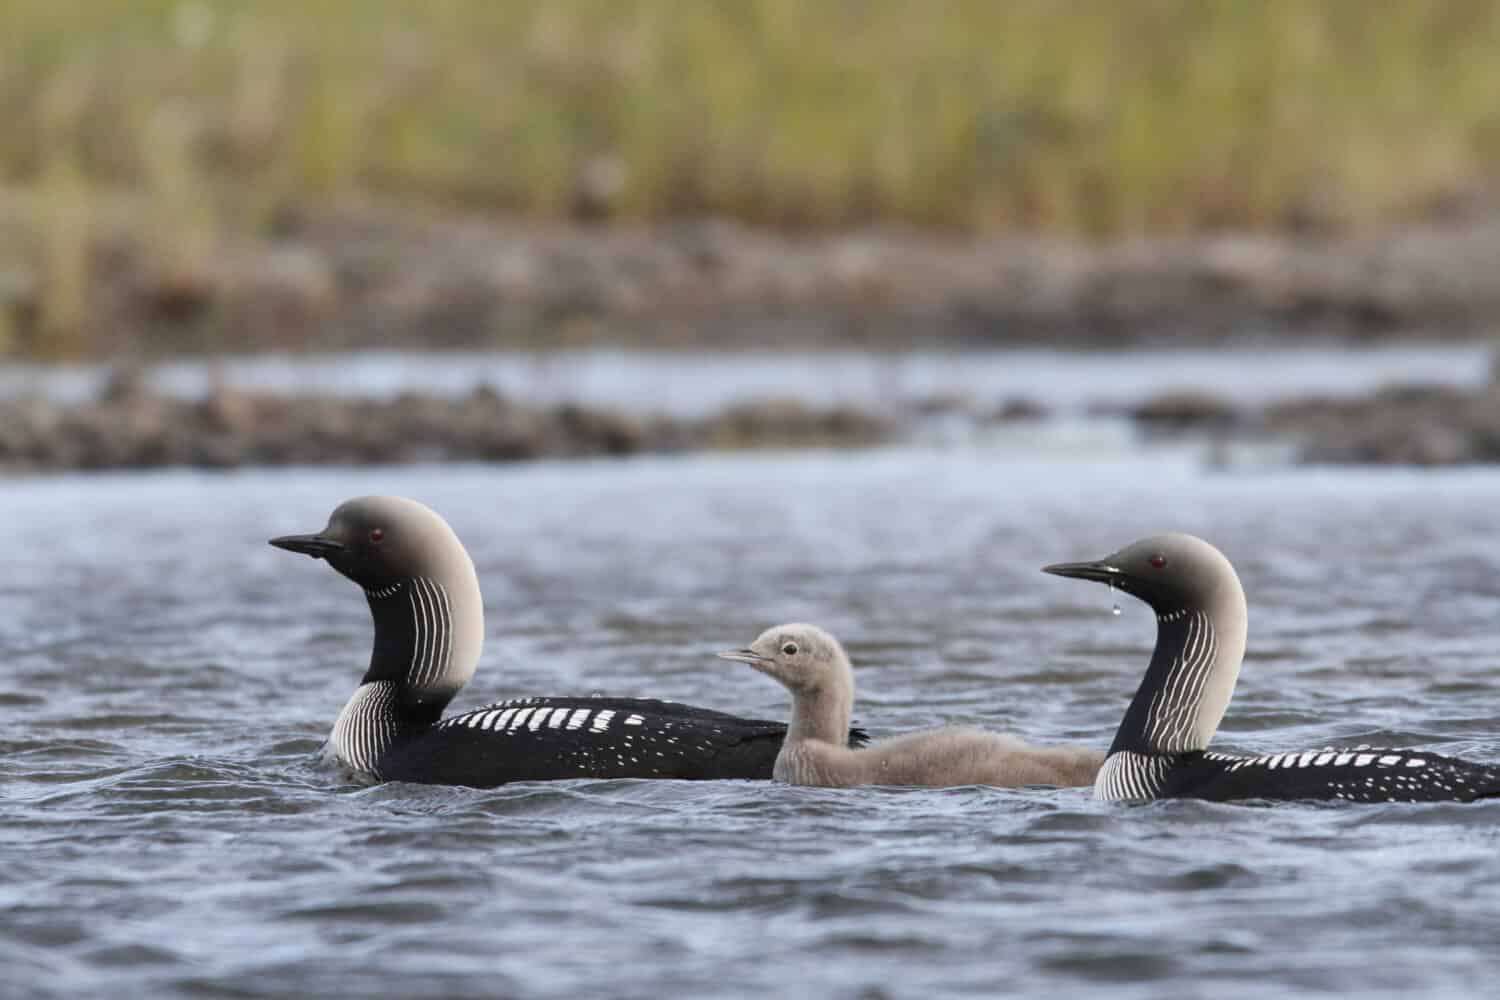 Pacific Loon or Pacific Diver with a young chick in arctic waters, near Arviat Nunavut, Canada